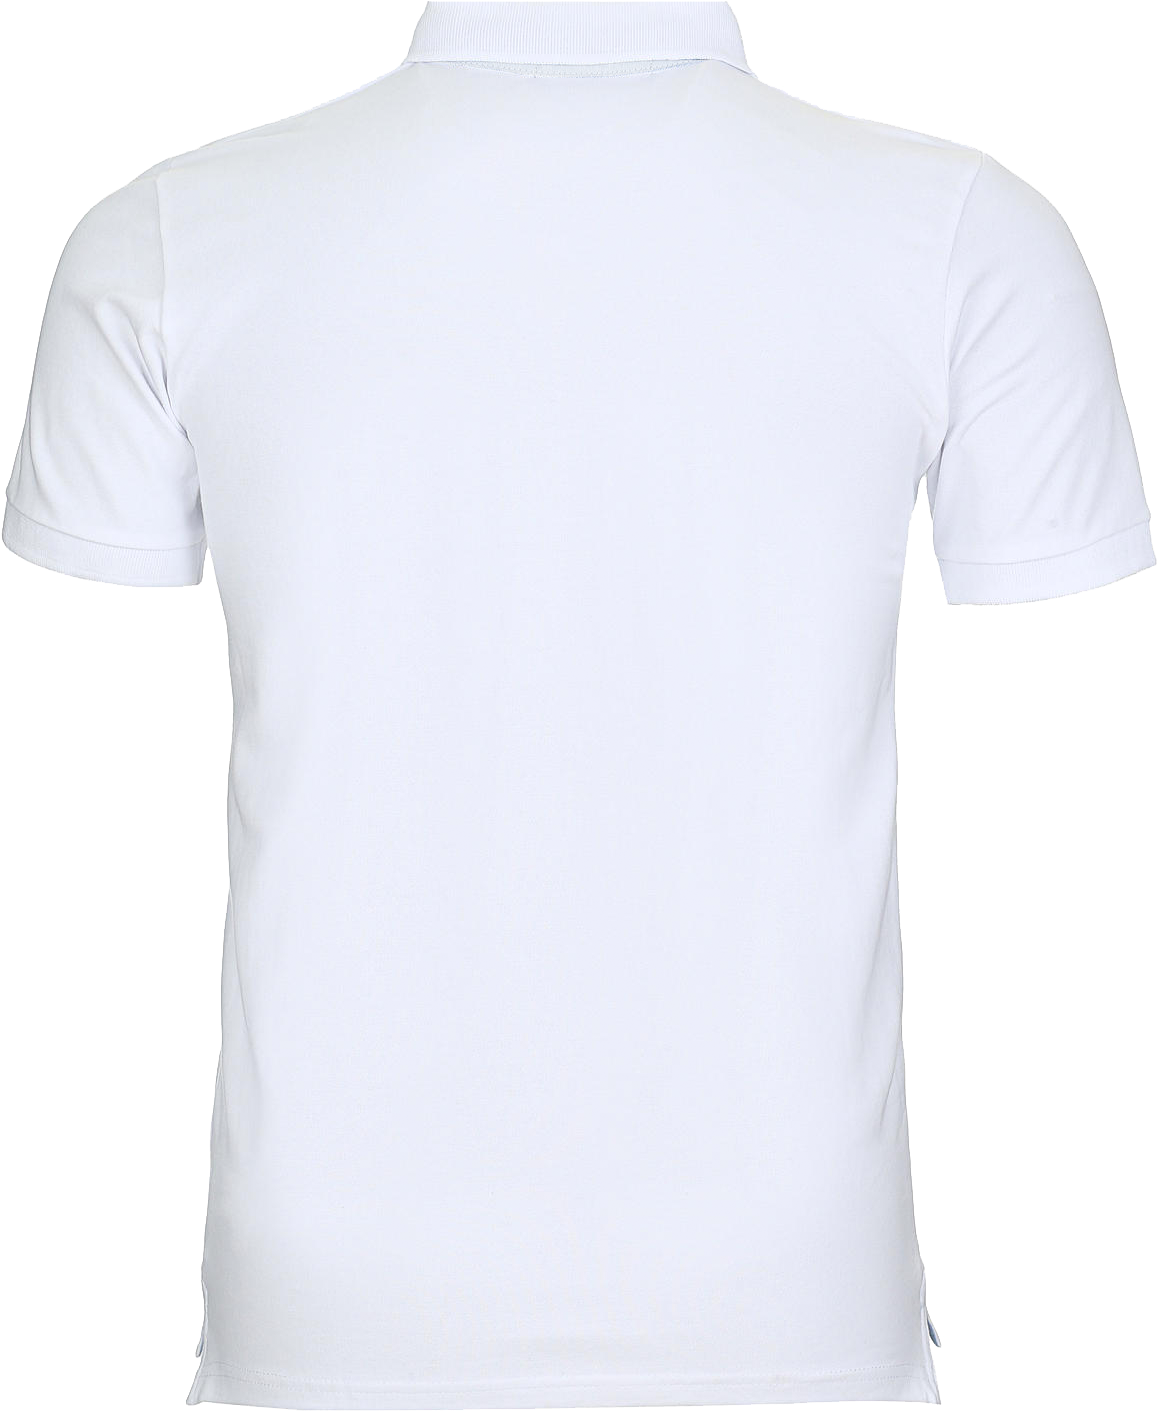 Prev - Transparent Background White T Shirt Png Clipart - Large Size ...